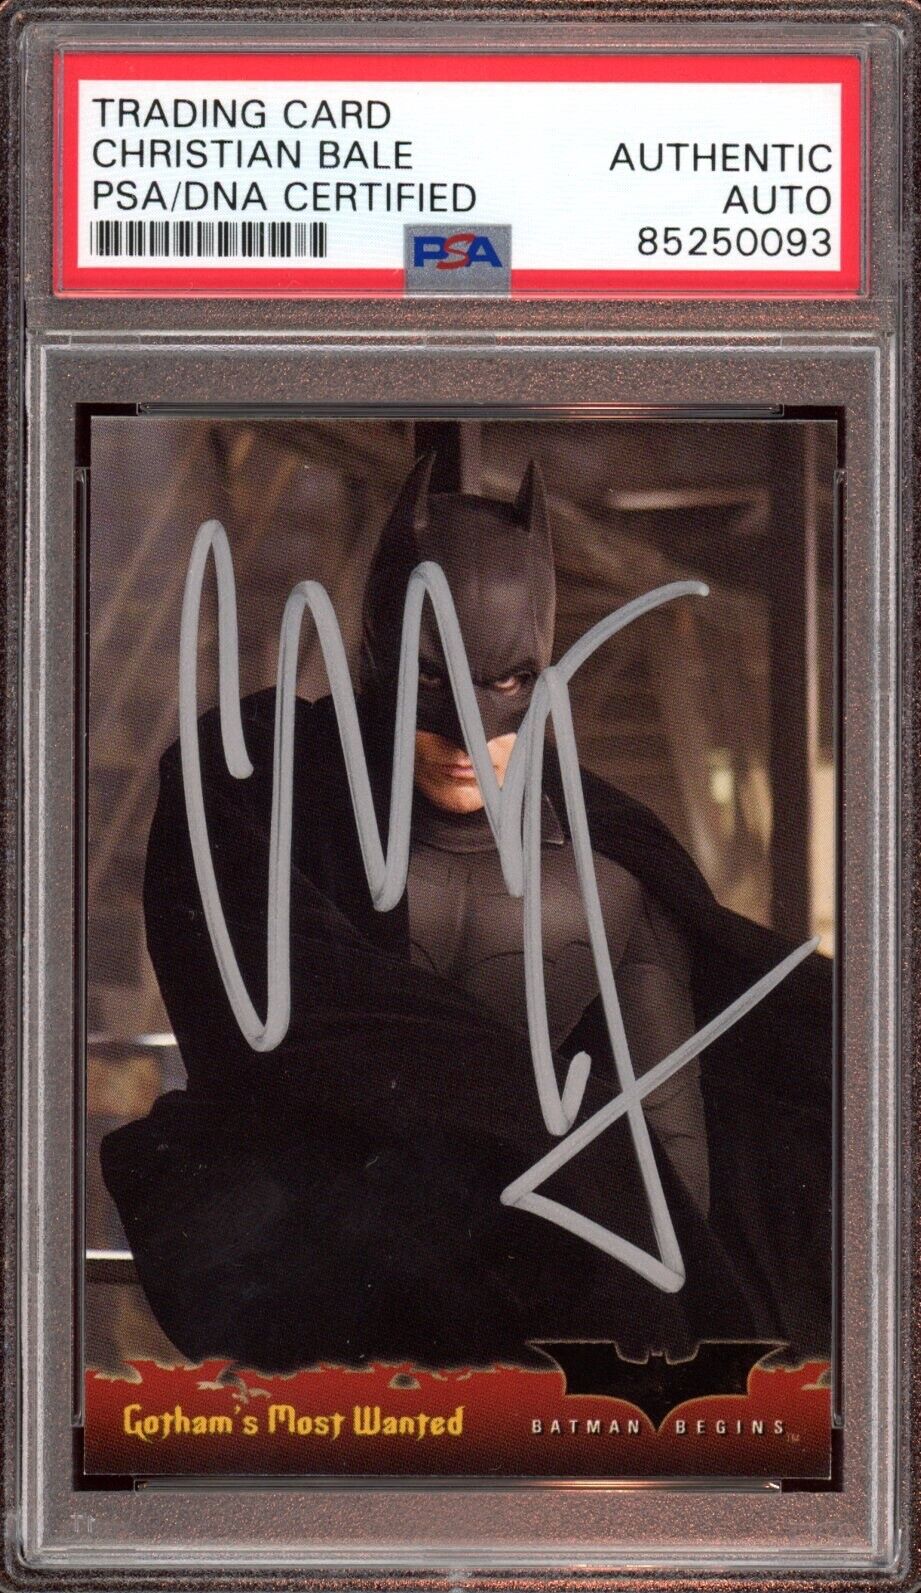 Christian Bale Signed 2005 Topps Batman Begins Rookie Card #47 Psa/Dna Auto RC